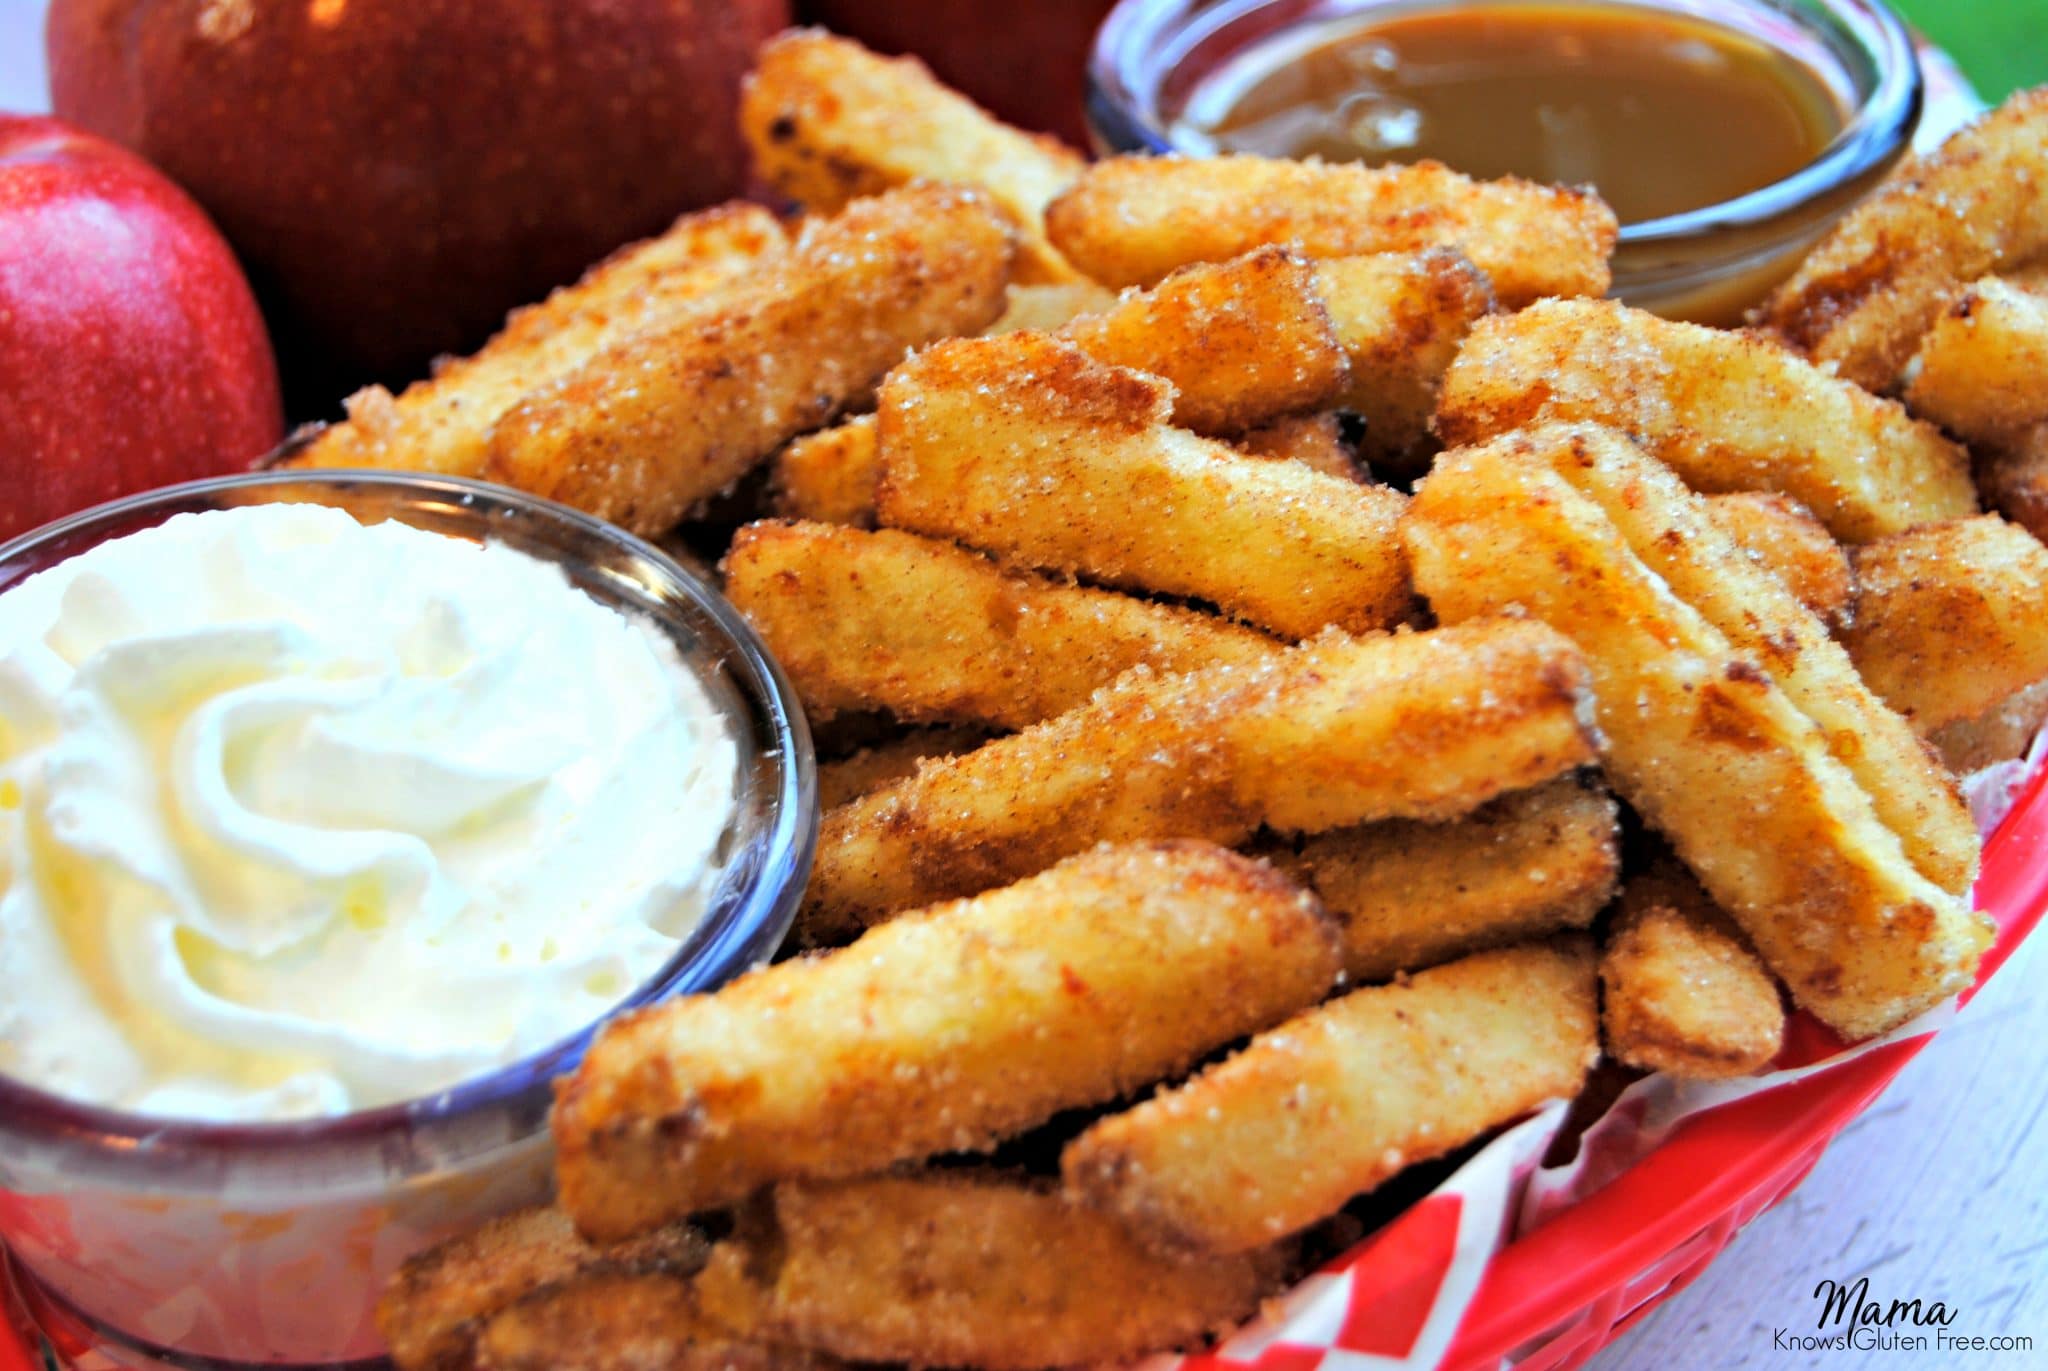  cinnamon apple fries in a basket with whipped cream and caramel dipping sauce with red apples in the background 